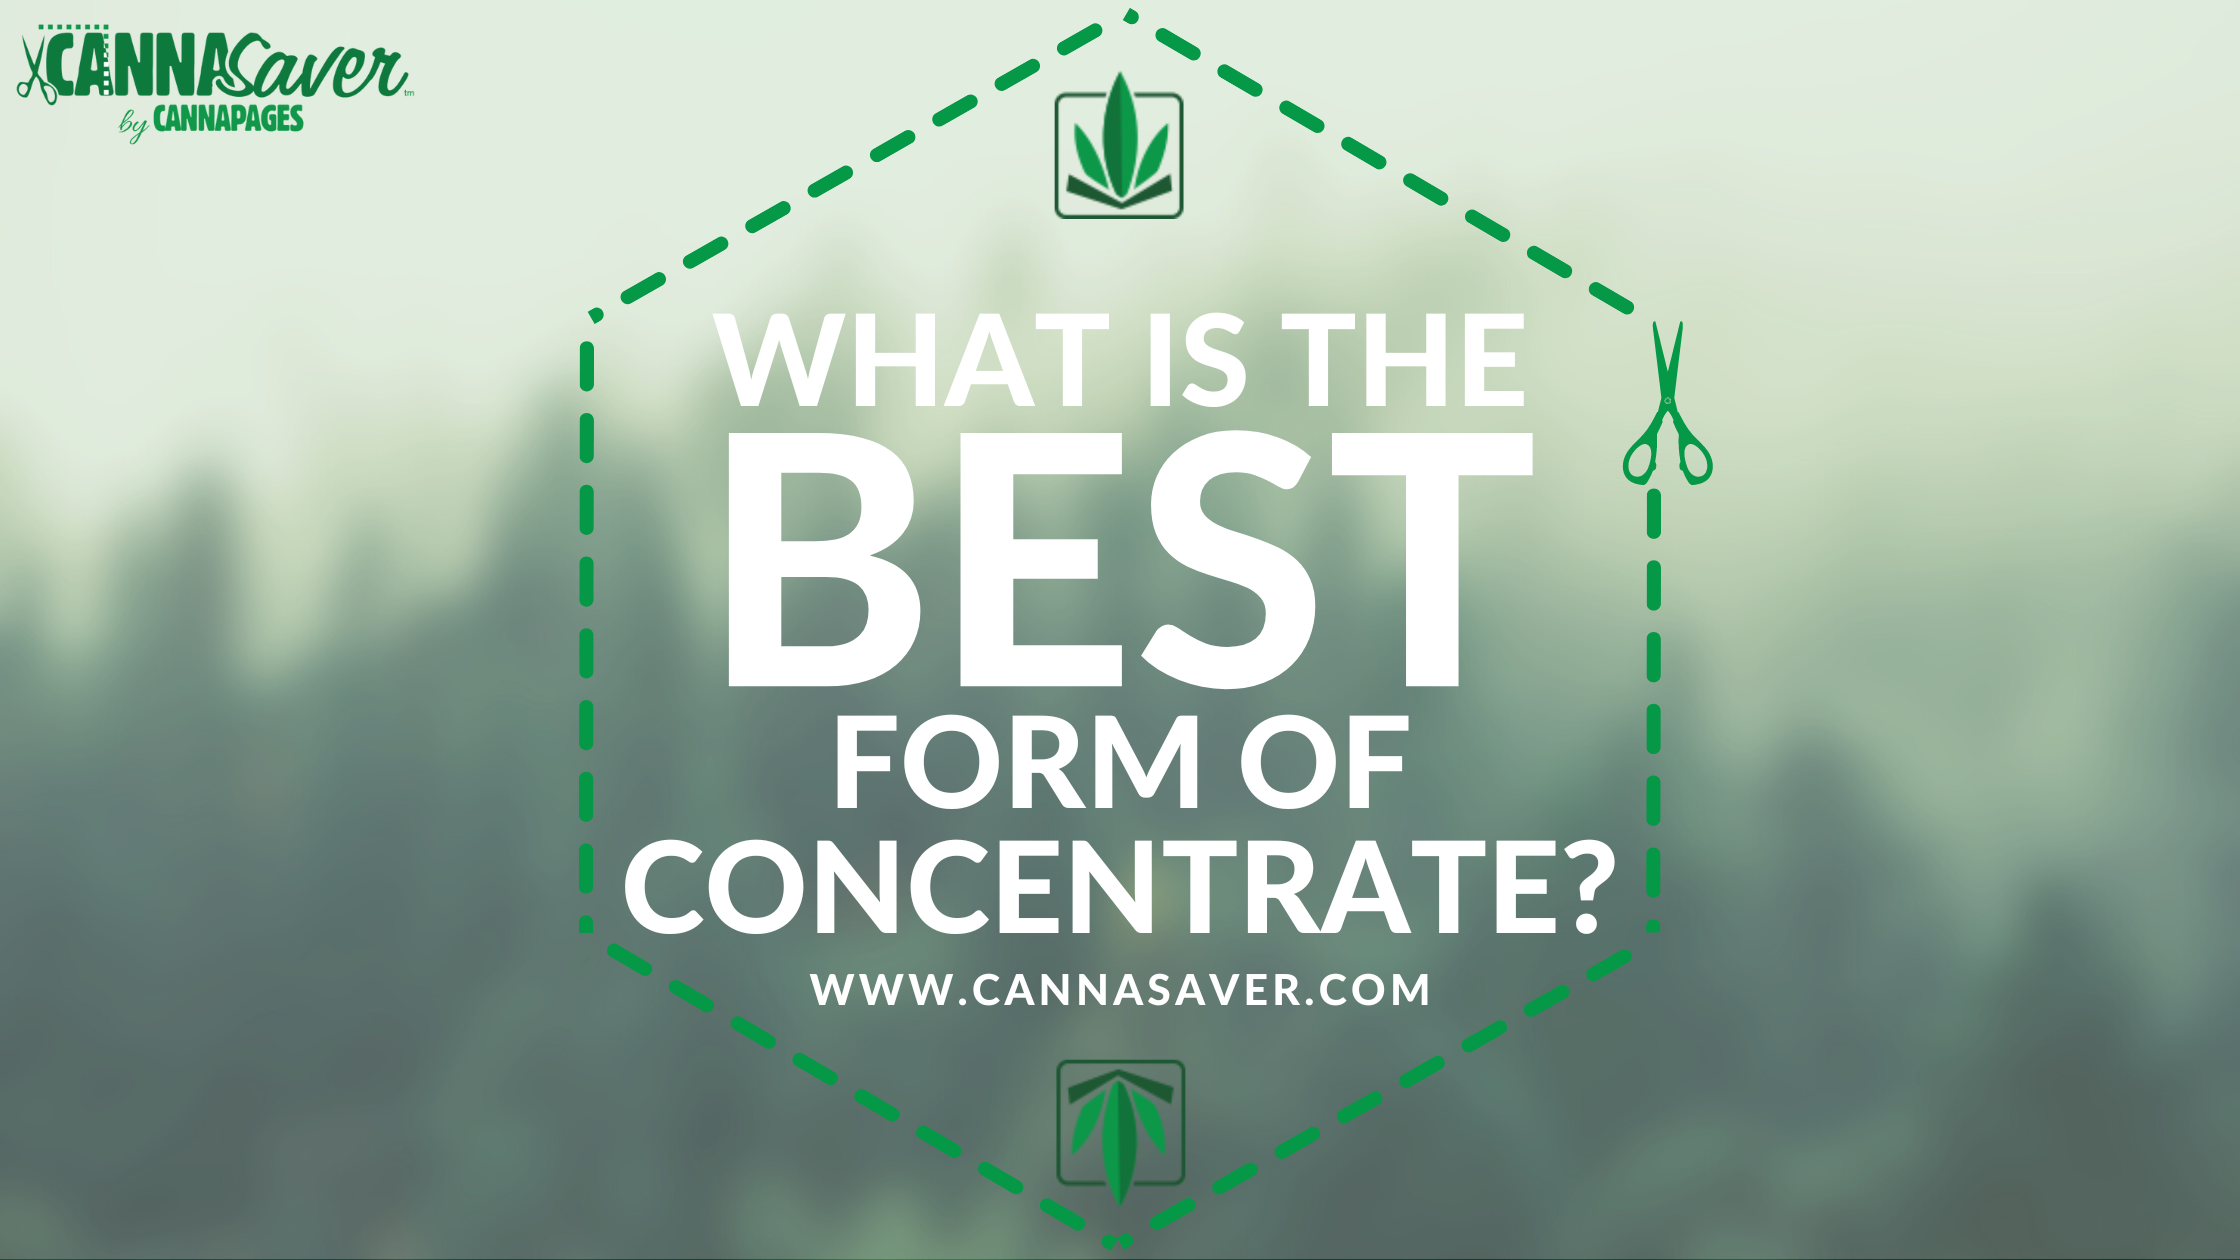 What is the Best Form of Concentrate?